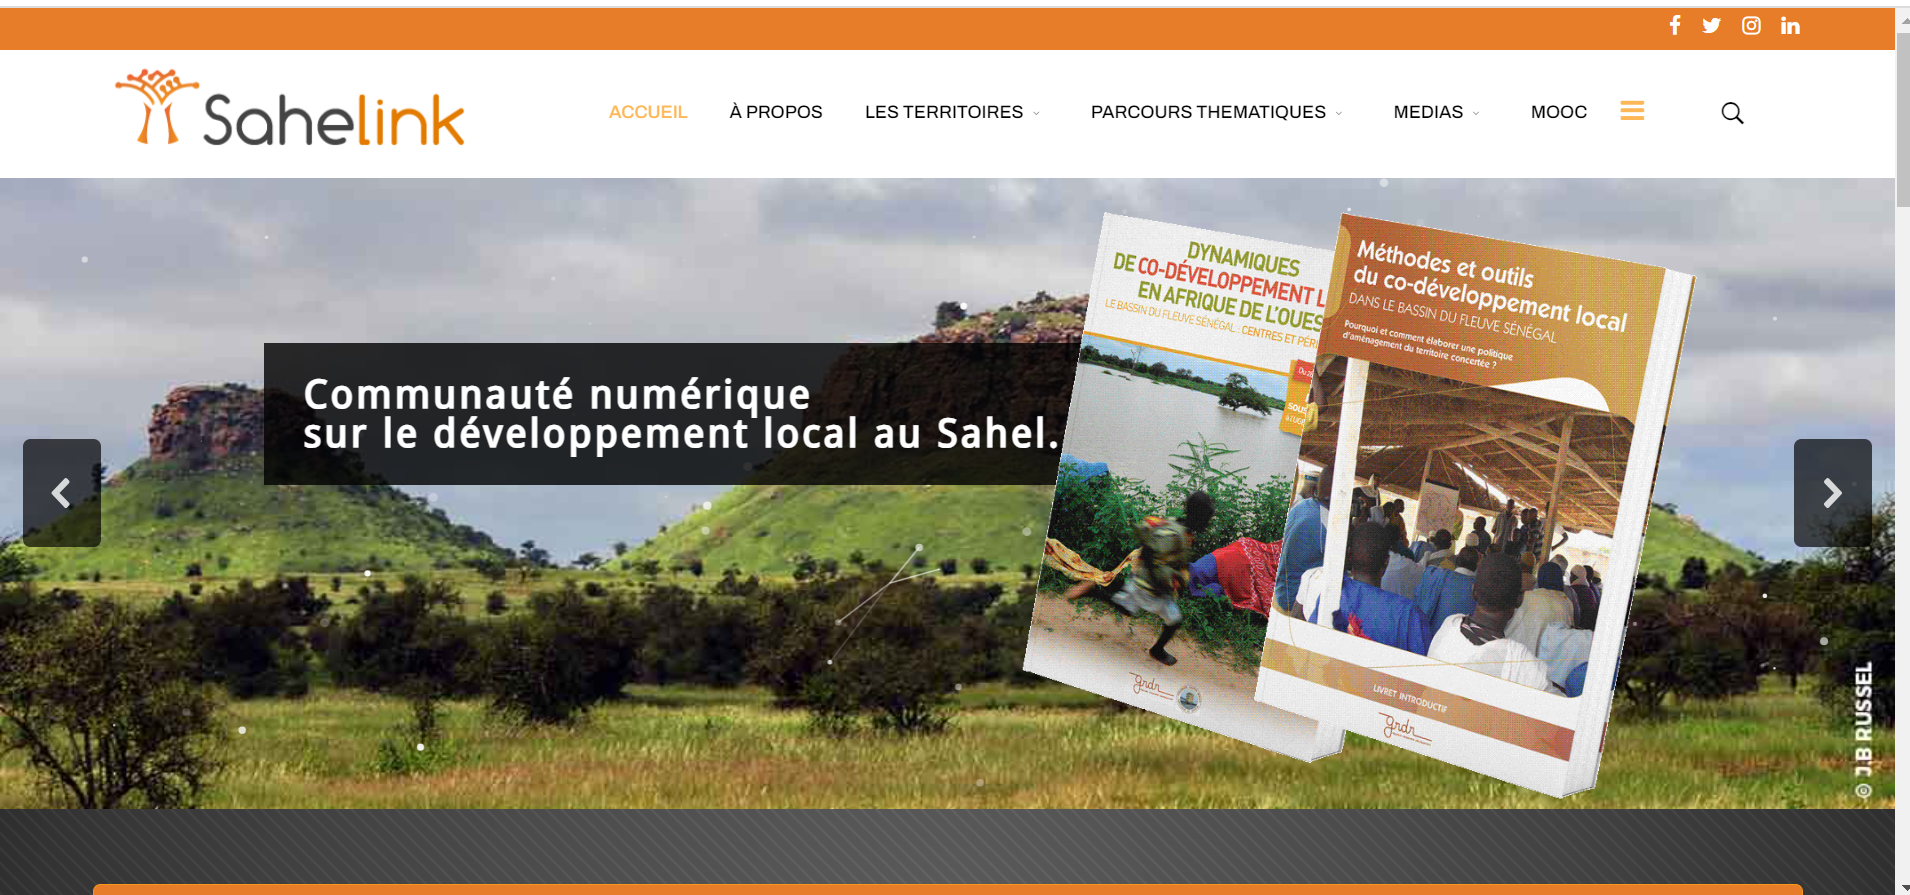 Thumbnail Sahelink: A digital community for local development players in the Sahel